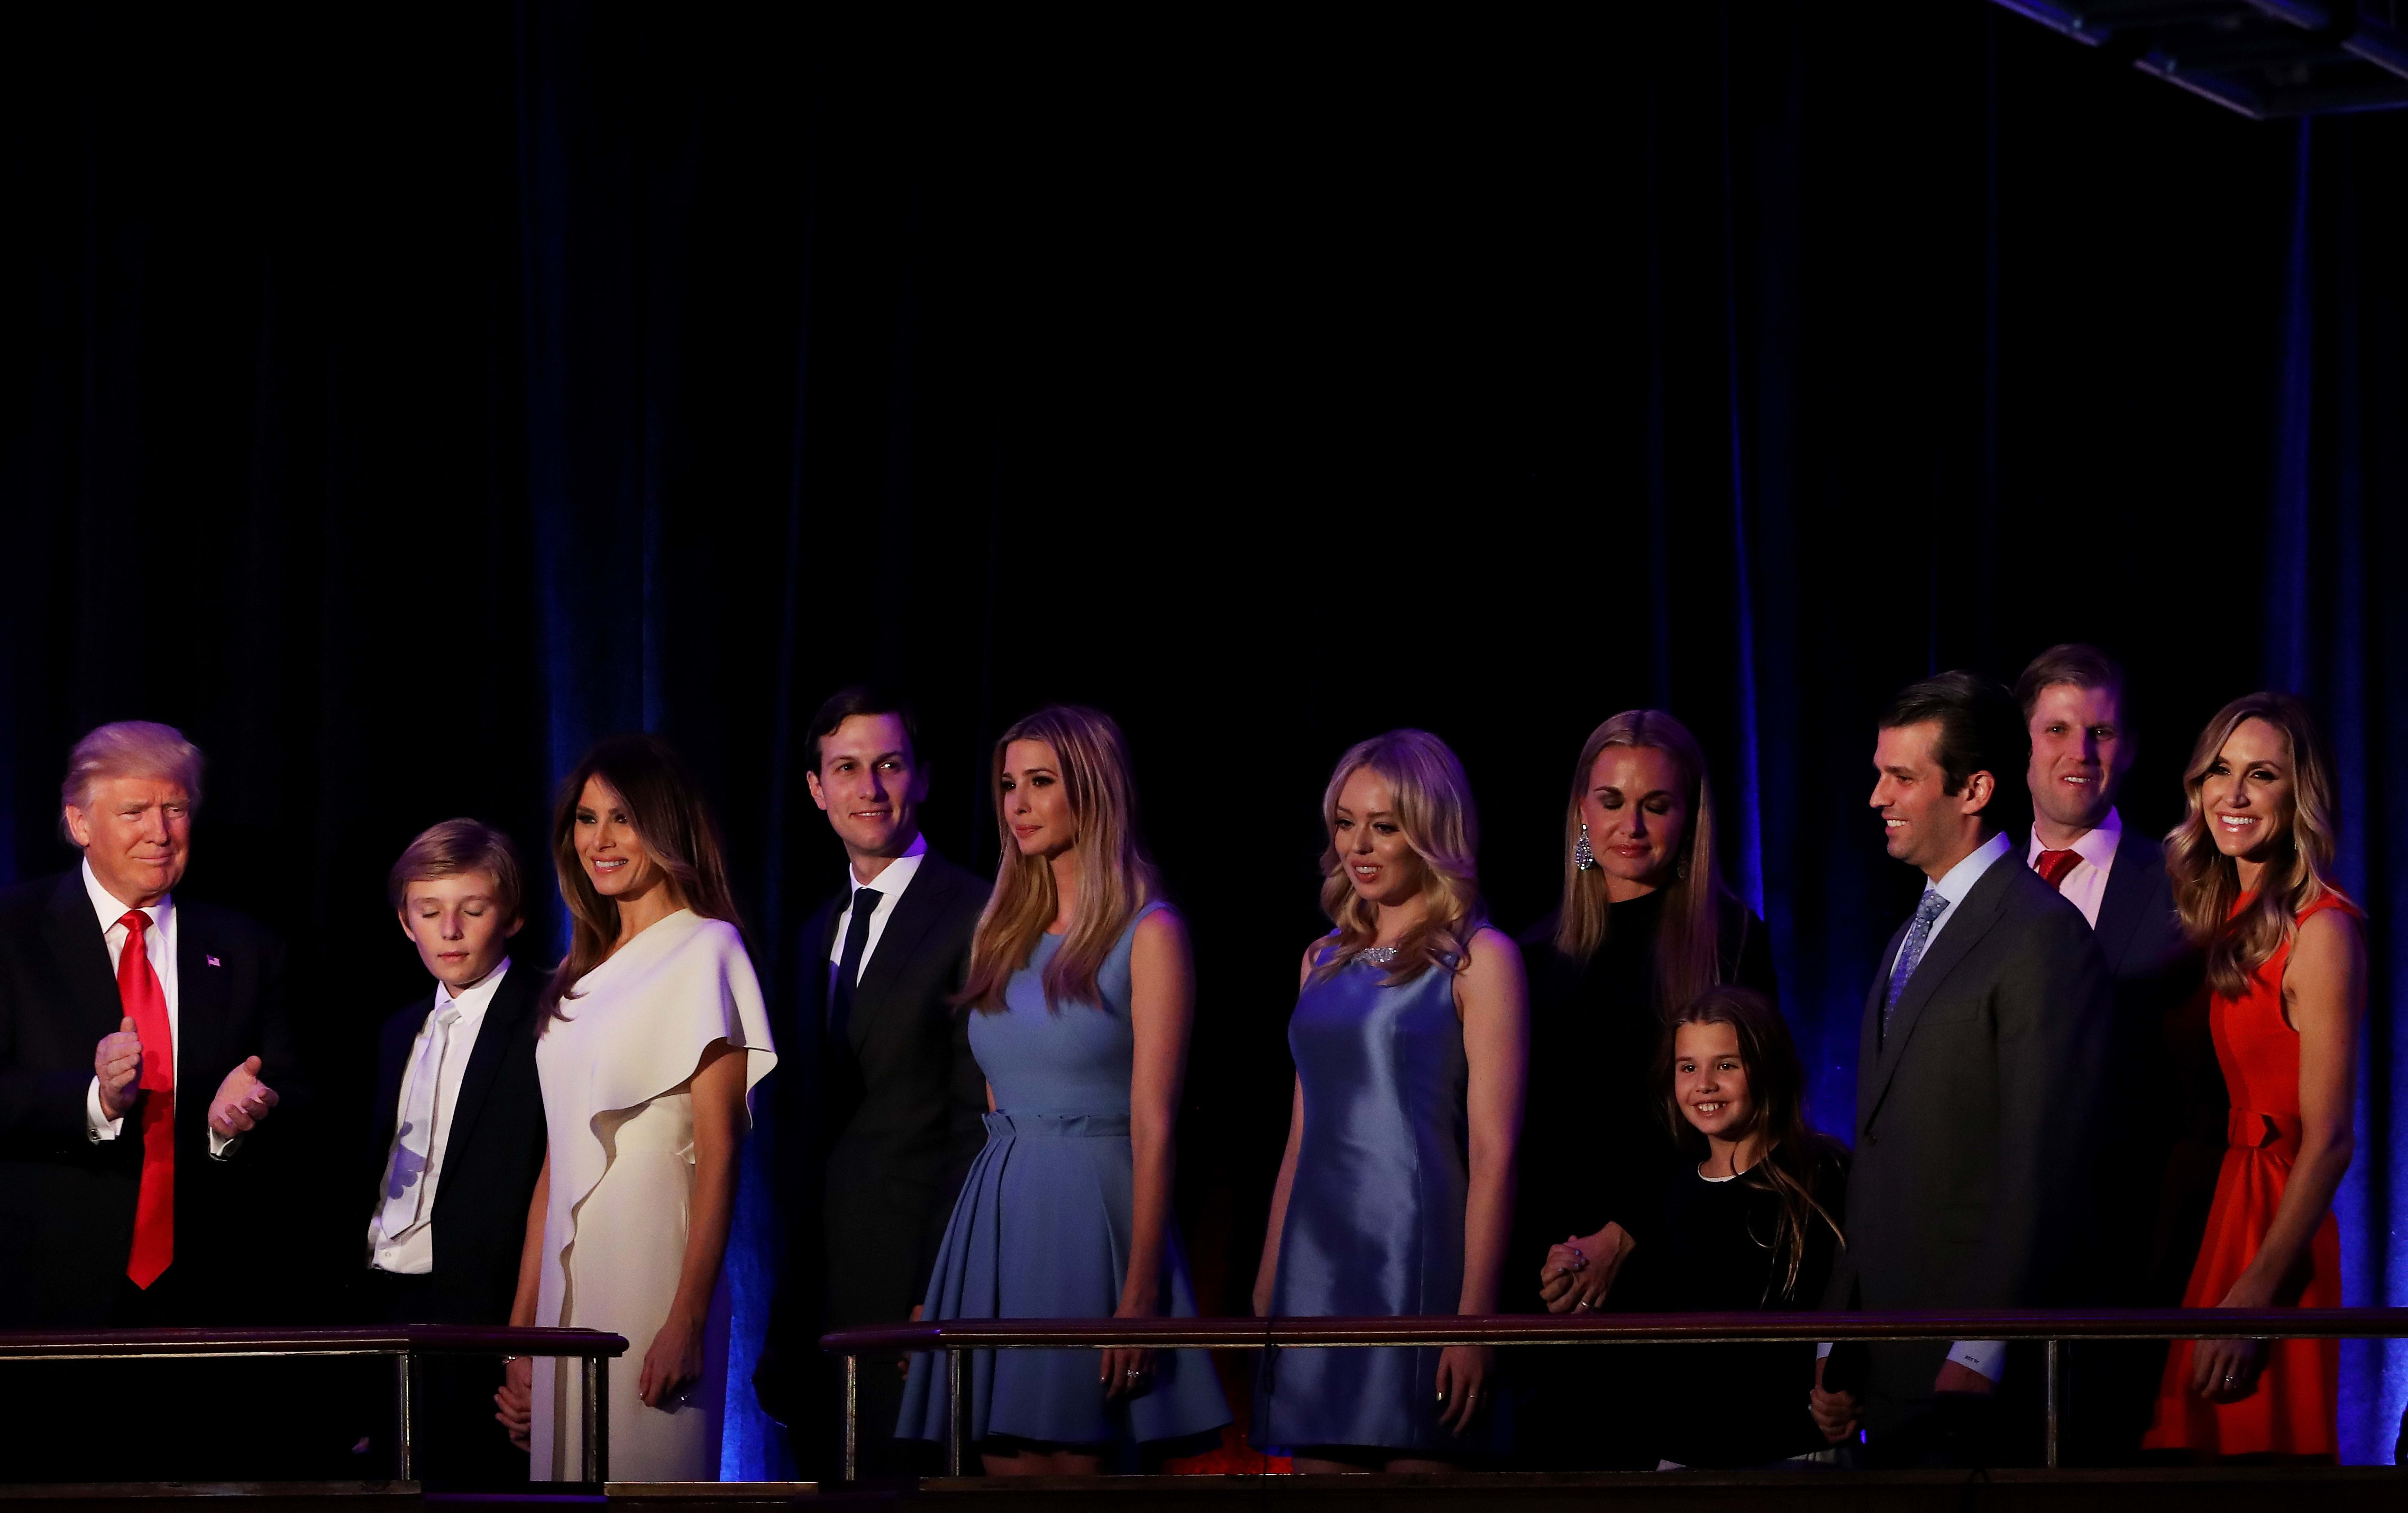 Donald Trump, supported by his family, makes his acceptance speech after winning the US presidential election.